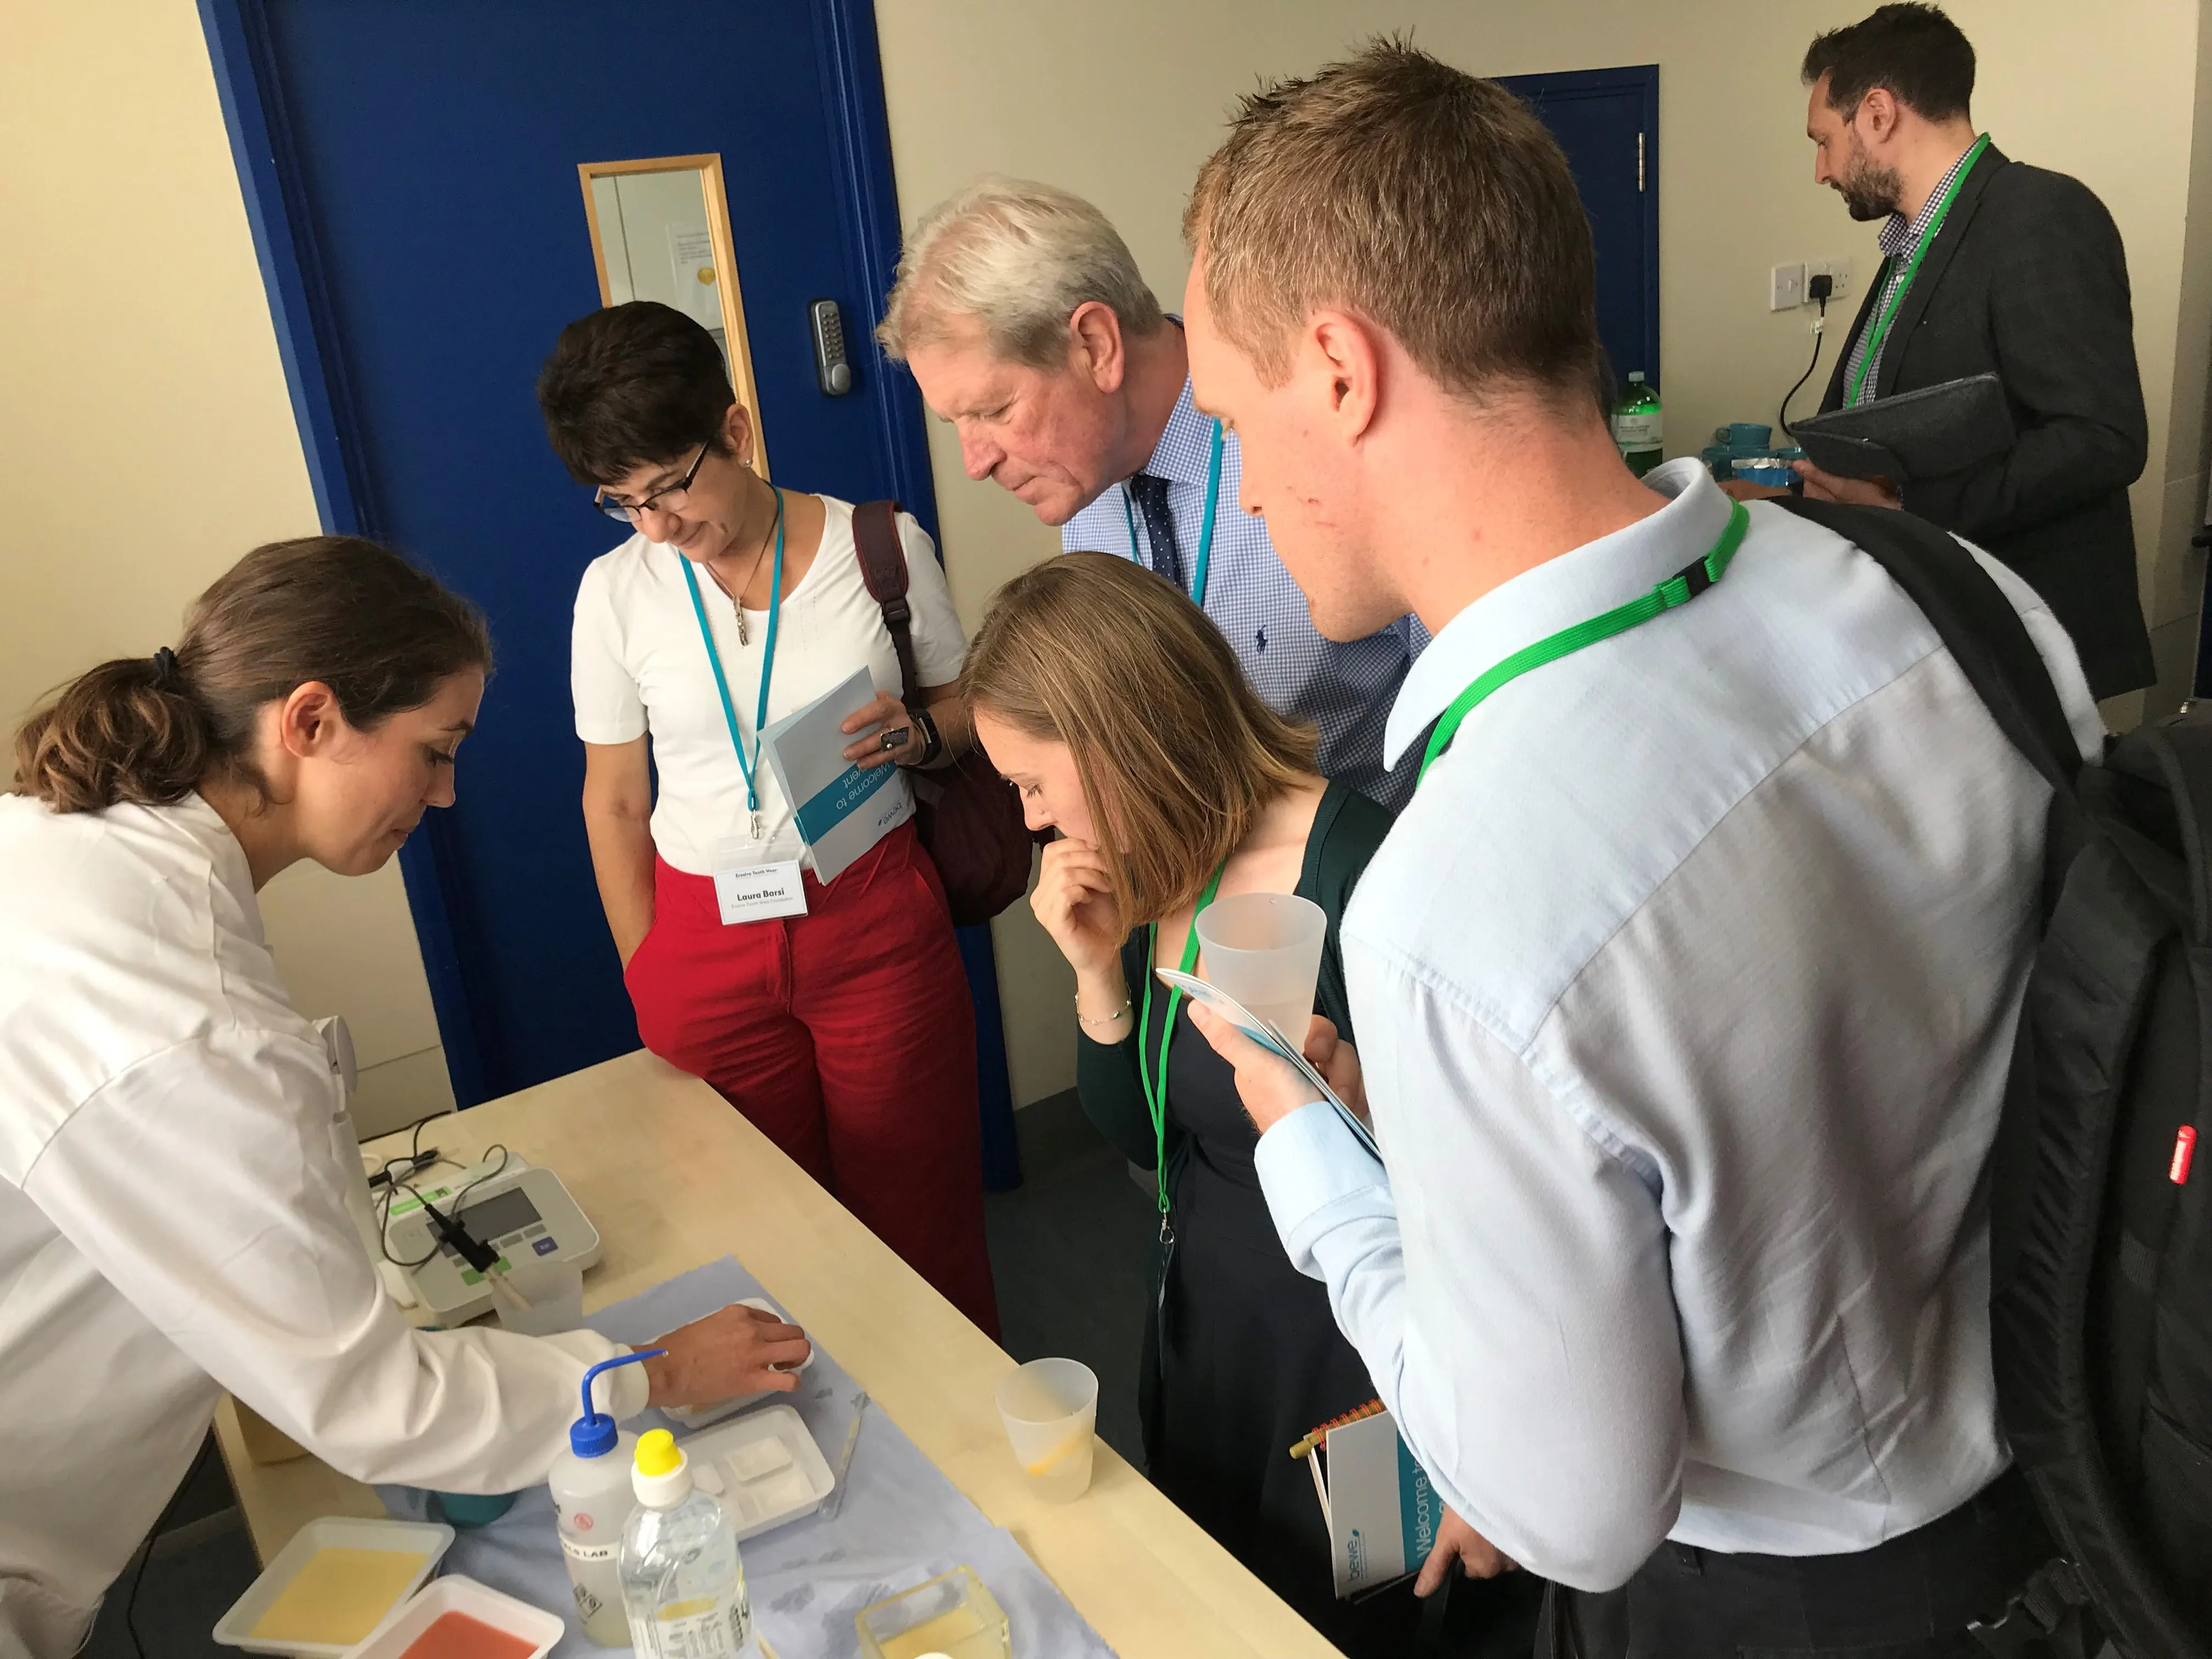 Demonstrations at the Erosive Tooth Wear meeting